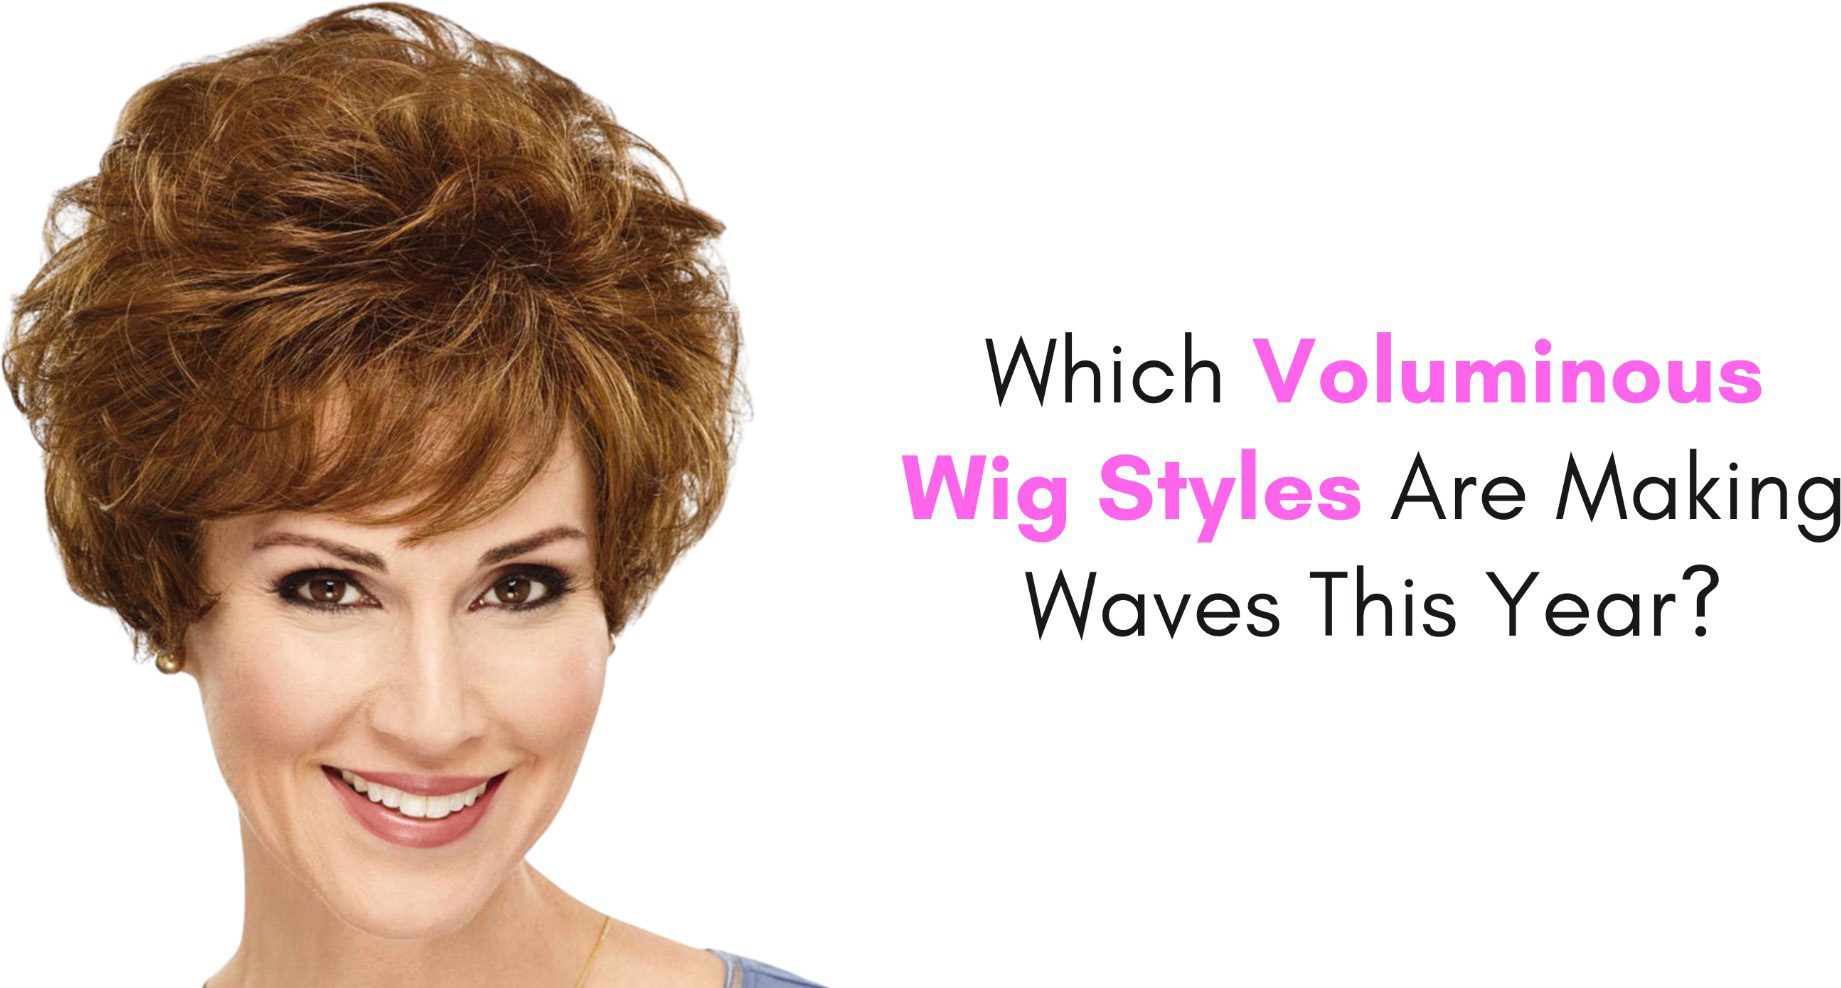 Which Voluminous Wig Styles Are Making Waves This Year?